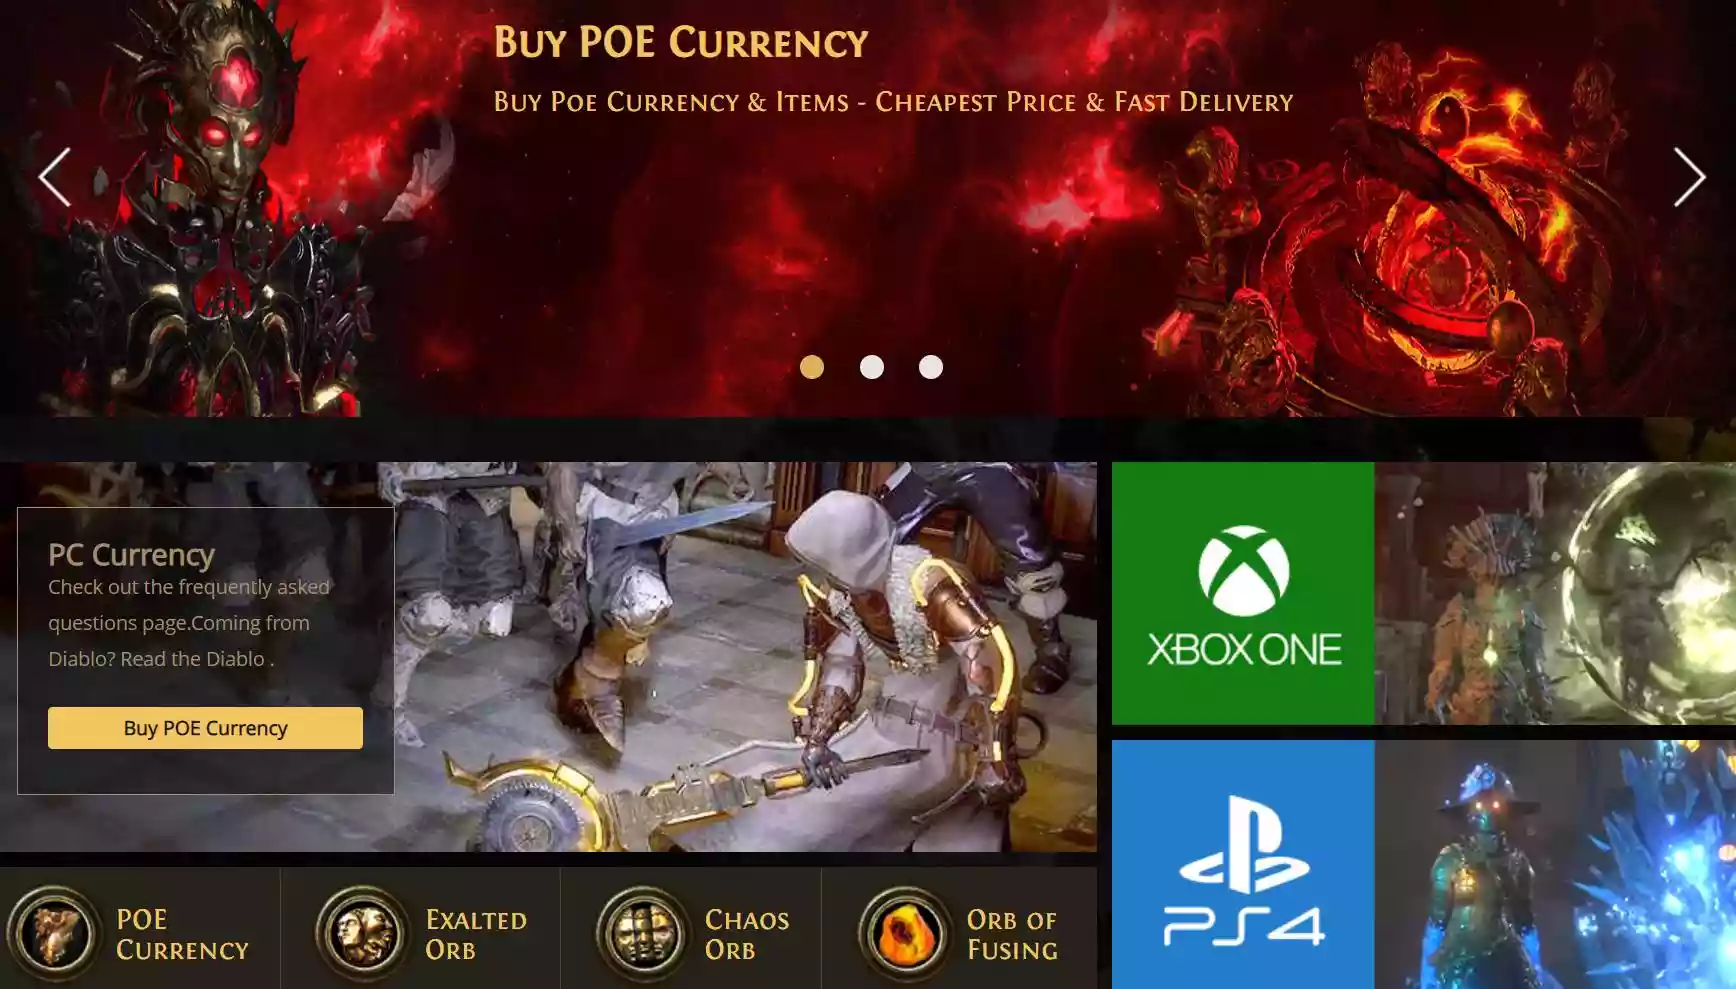 How we get the POE Currency and POE Items